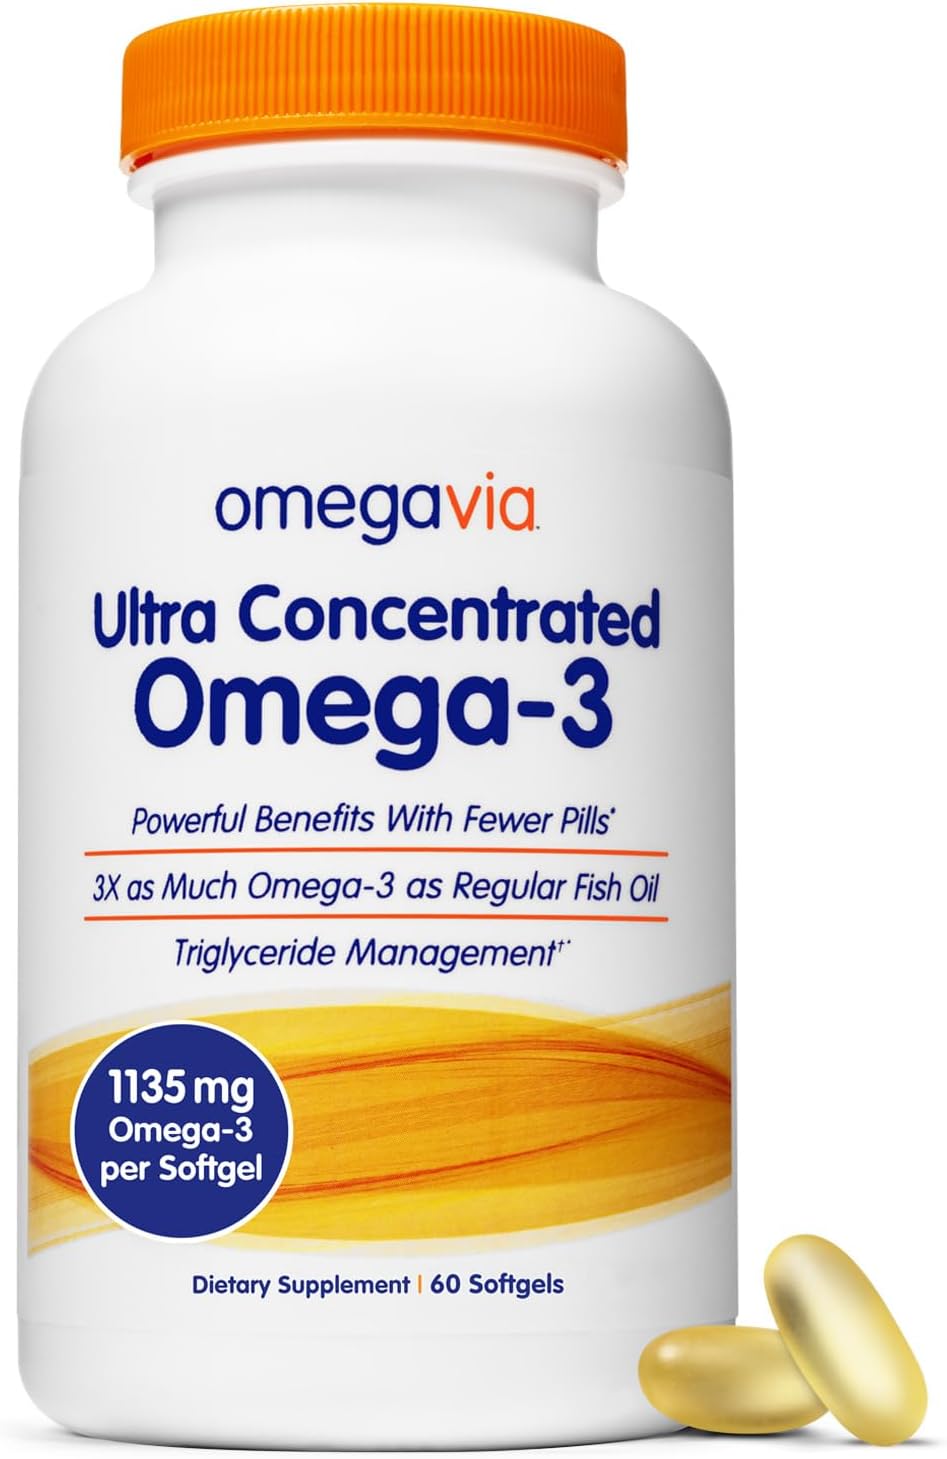 OmegaVia Ultra Concentrated Omega 3 Fish Oil Burpless, 60 Softgels, Triple Strength Omega 3 Fish Oil Supplements $15.99 w/ Promo and S&S + Free Ship w/ Prime